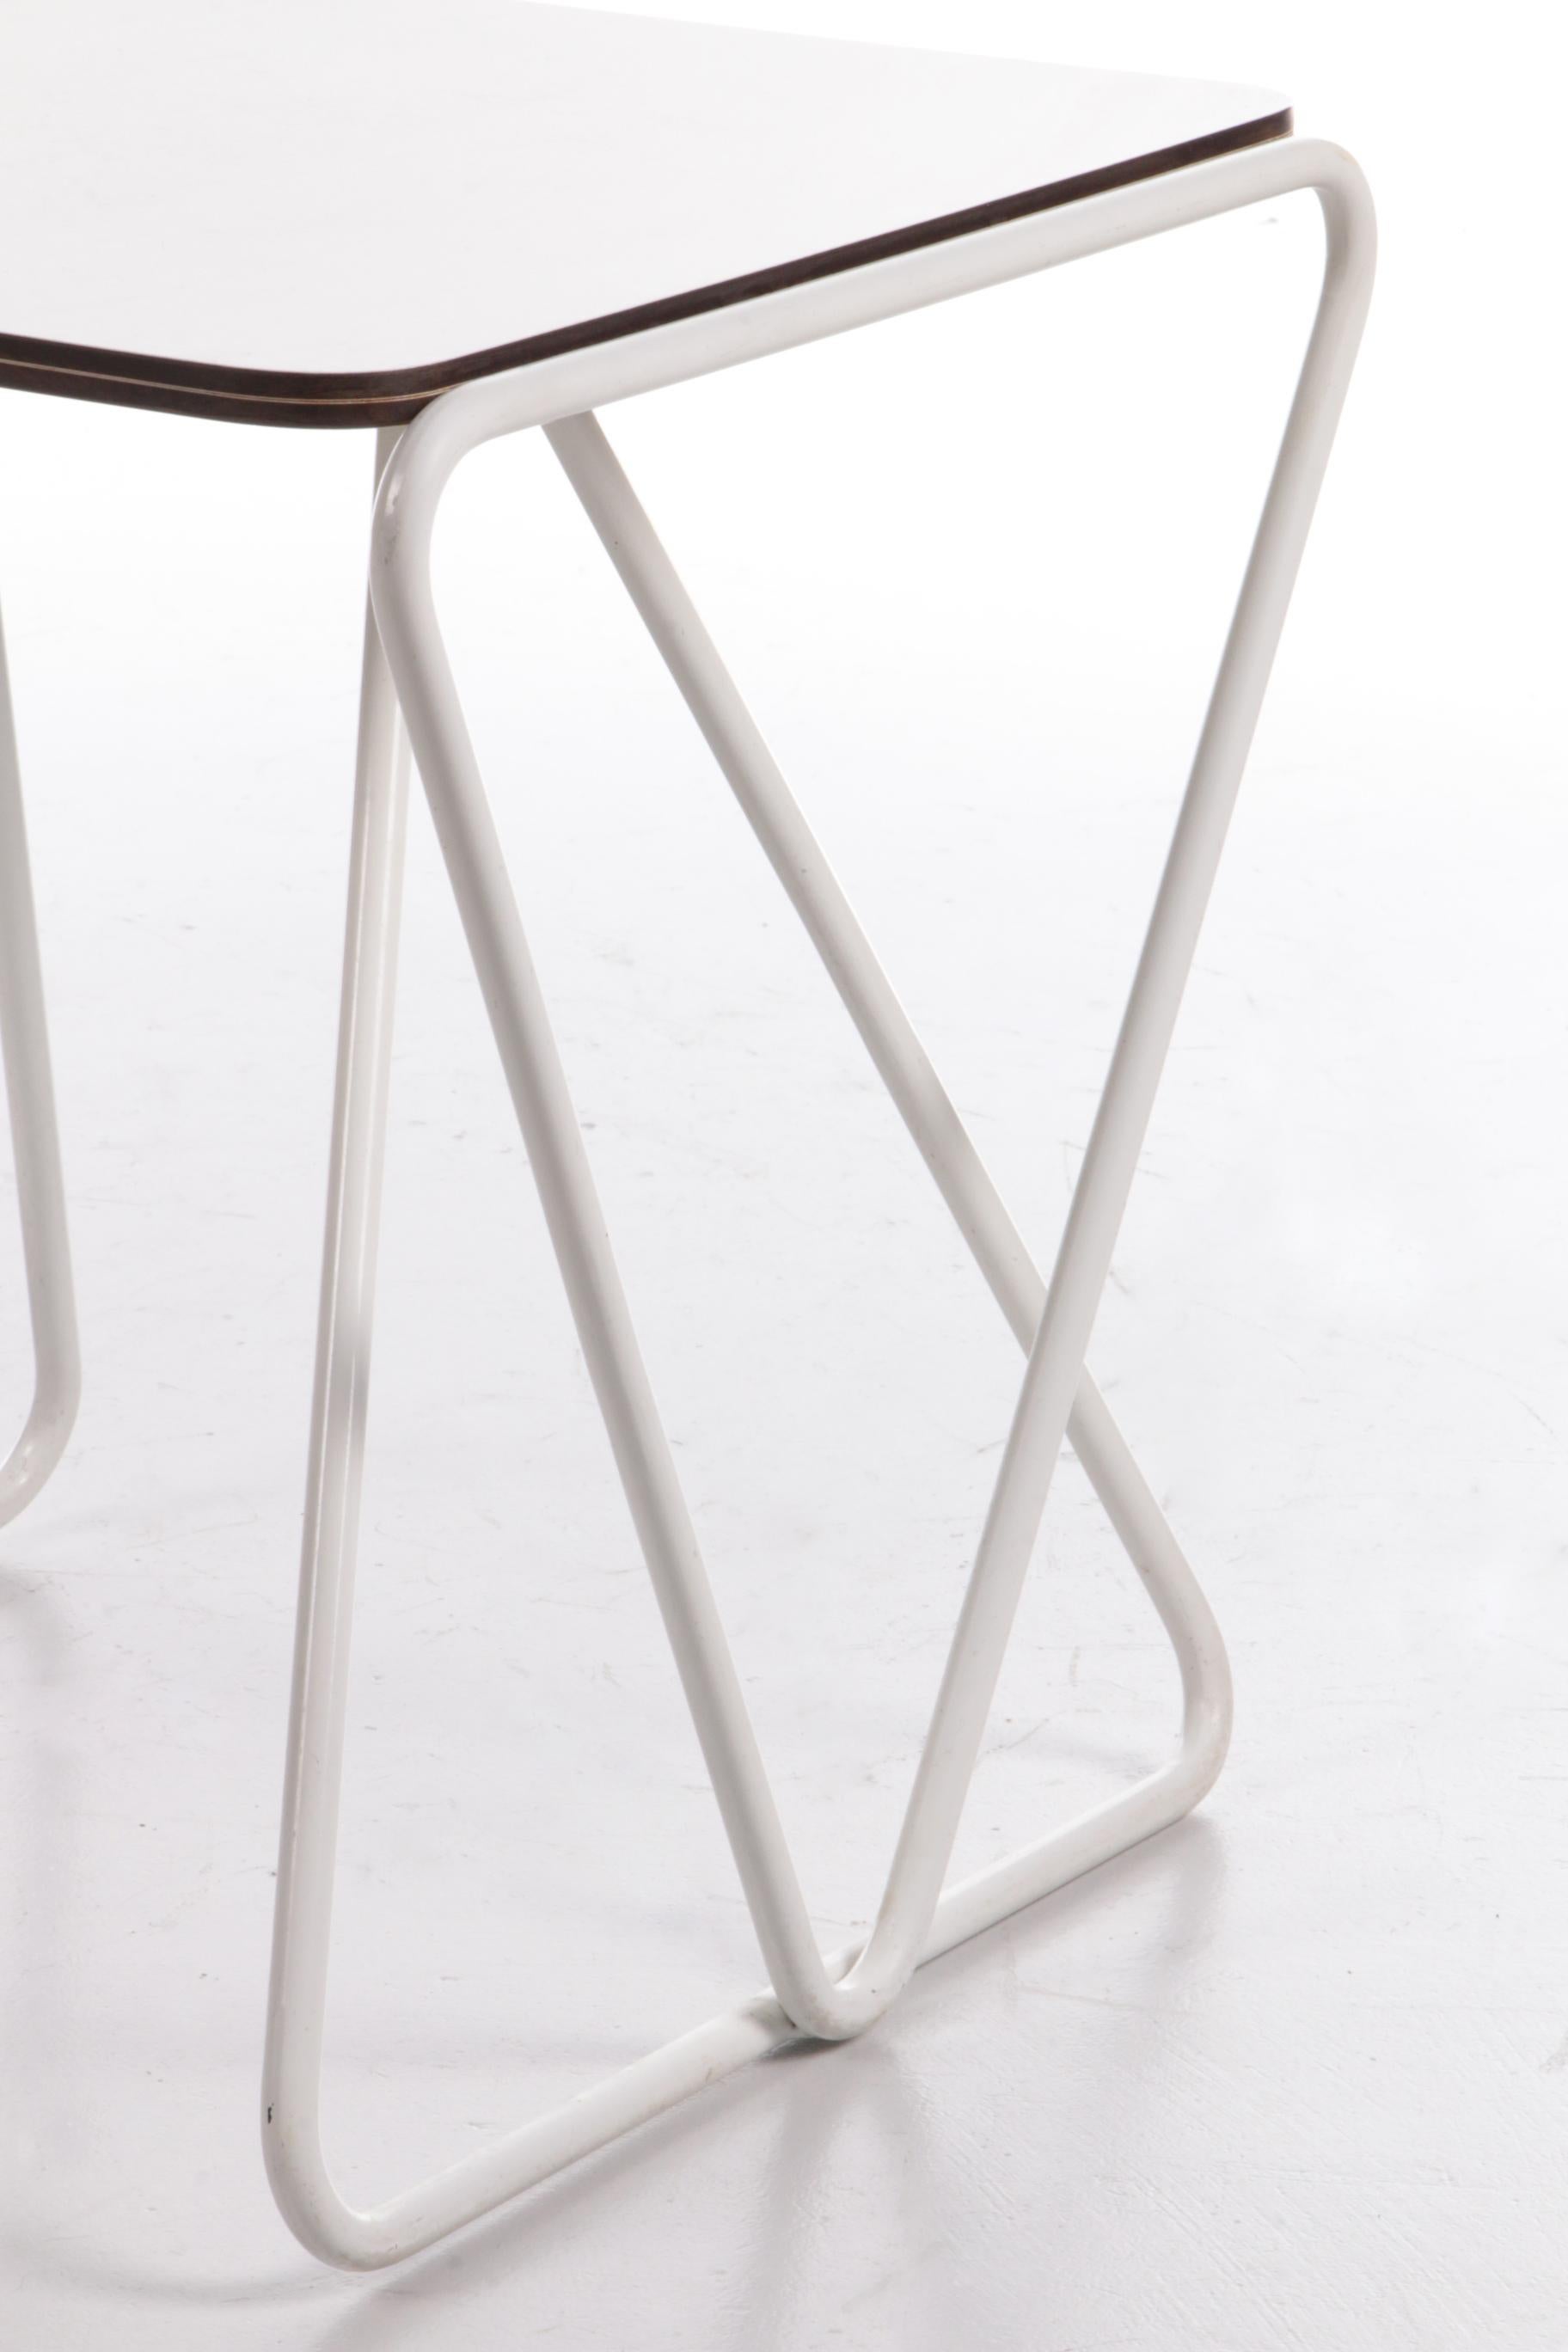 Walter Antonis Side Table for I-Form Holland, 1978 For Sale 3